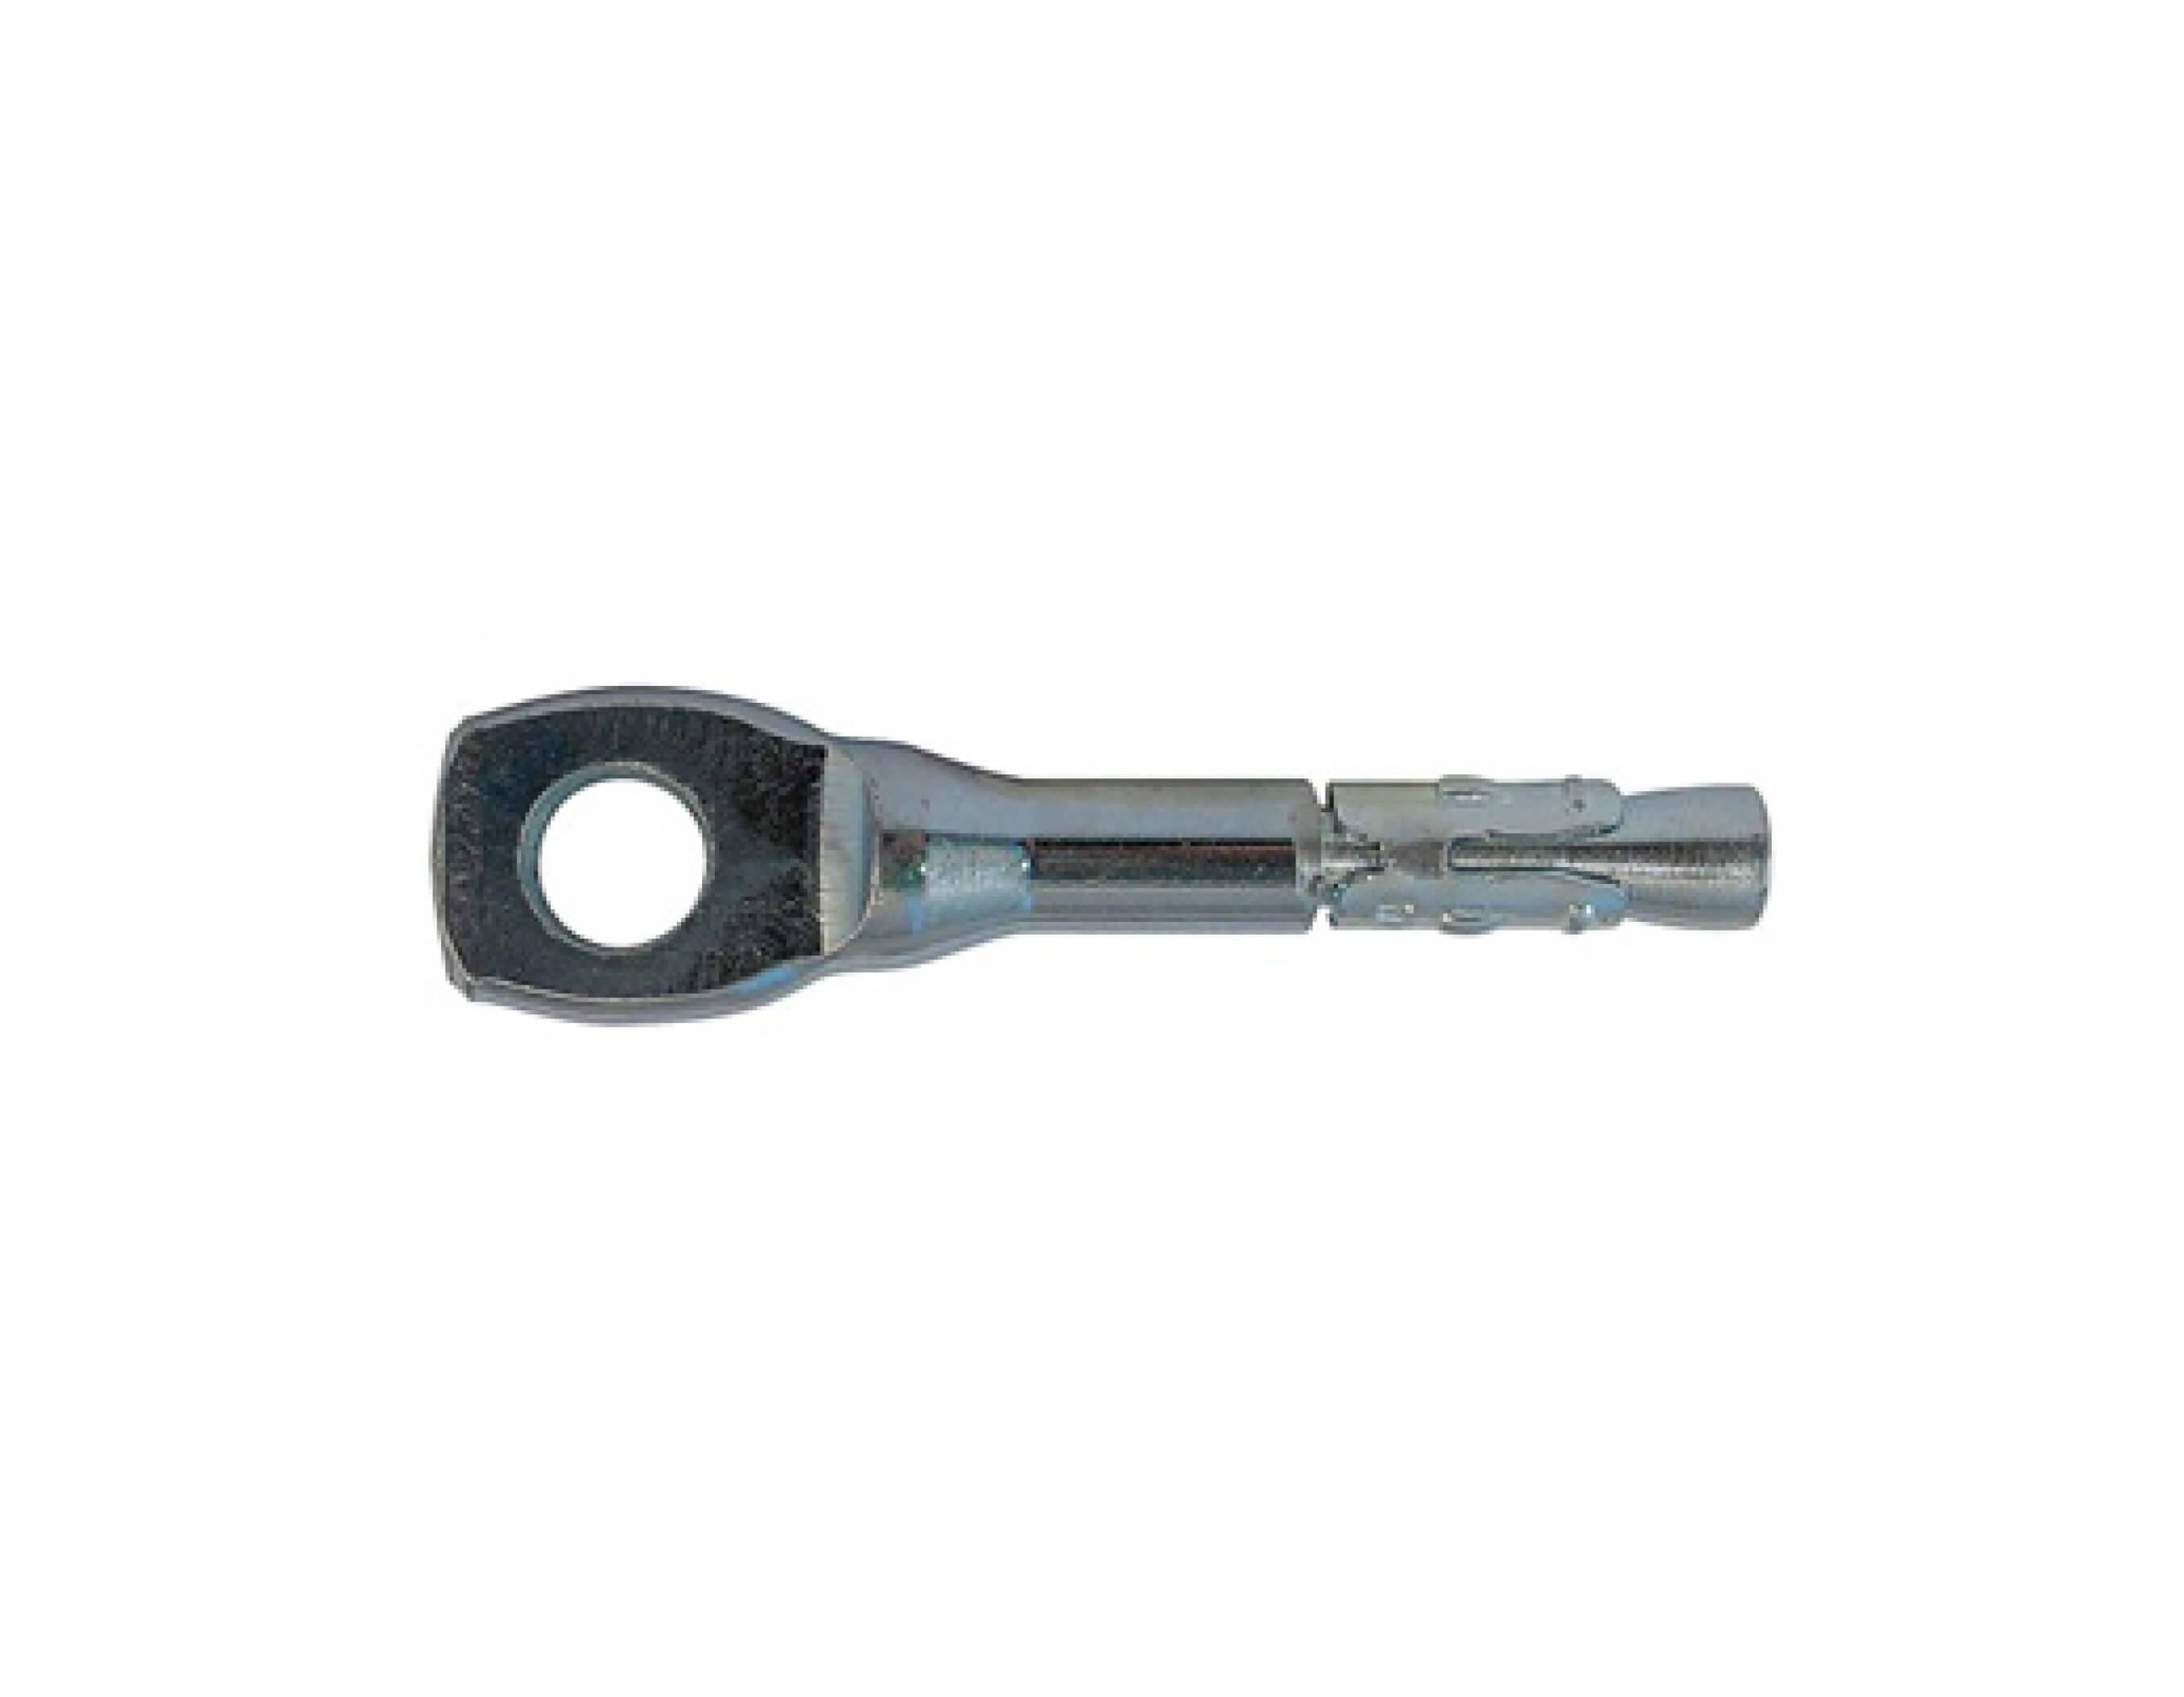 1/4 X 2-1/4 ACOUSTIC WEDGE ANCHOR